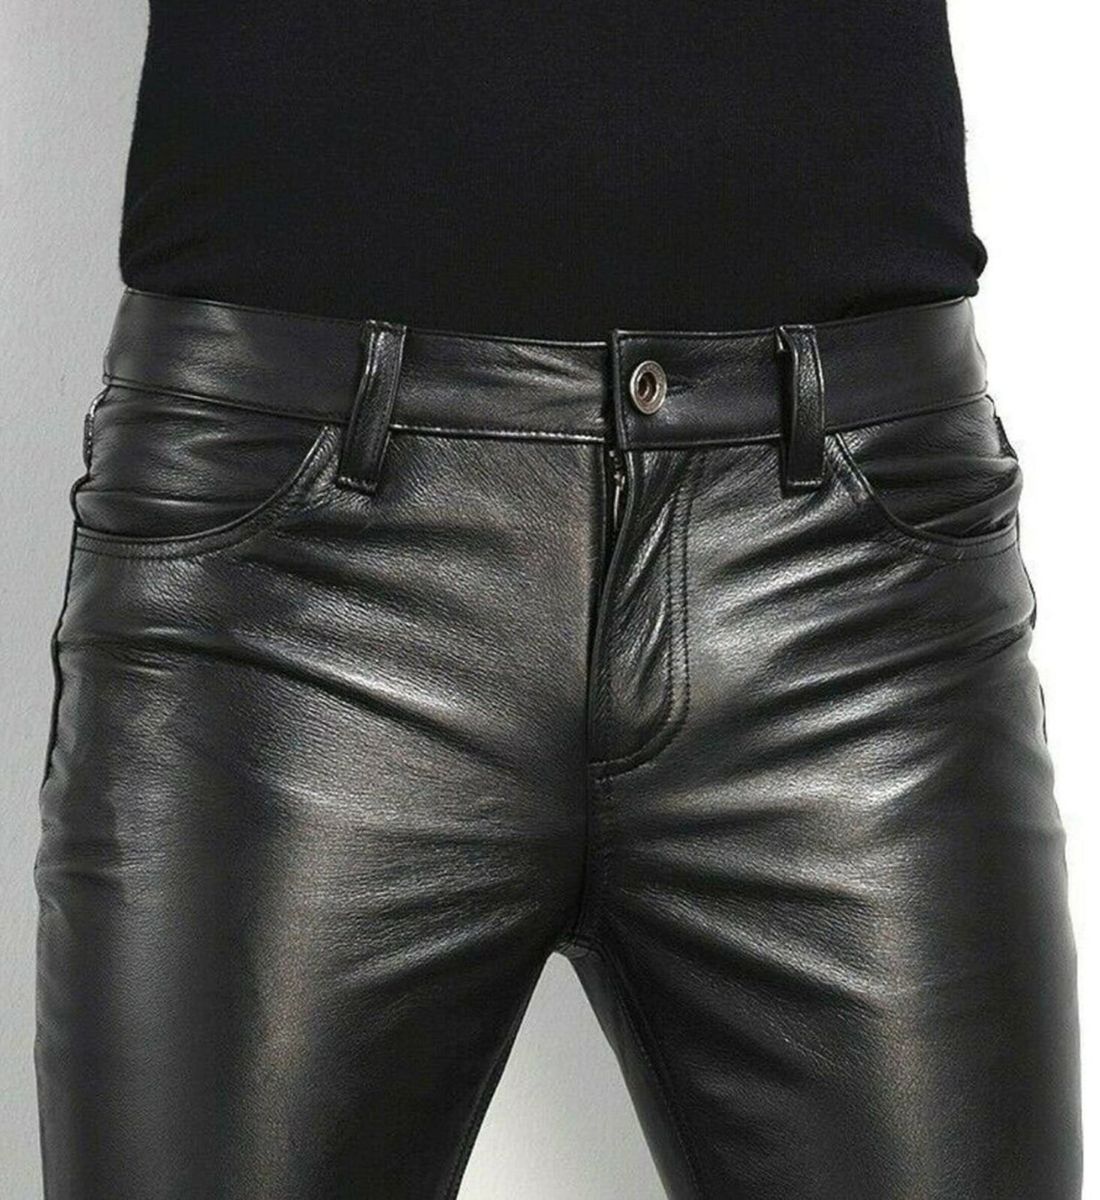 Party-Ready Leather Pants: Men's Classic Sheep Leather